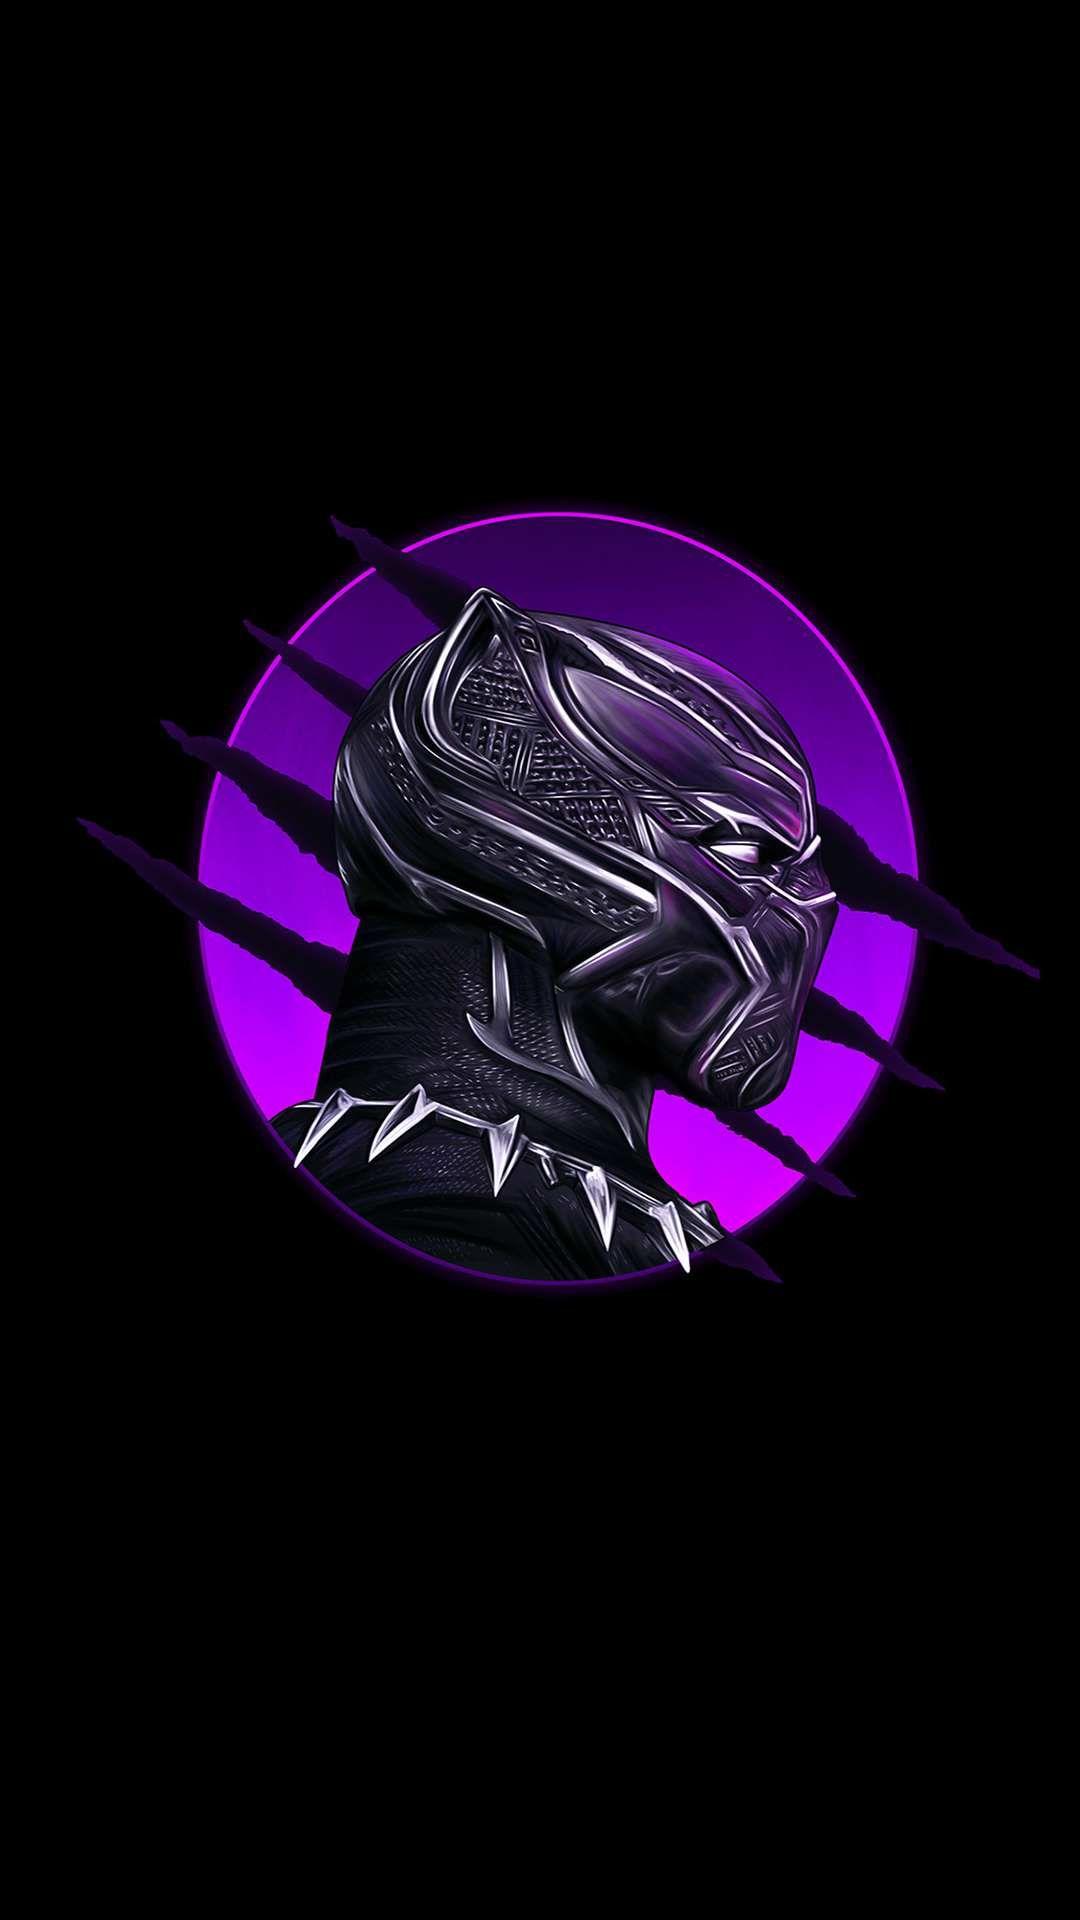 1080 x 1920 · jpeg - Black Panther Logo Android Wallpapers - Wallpaper Cave